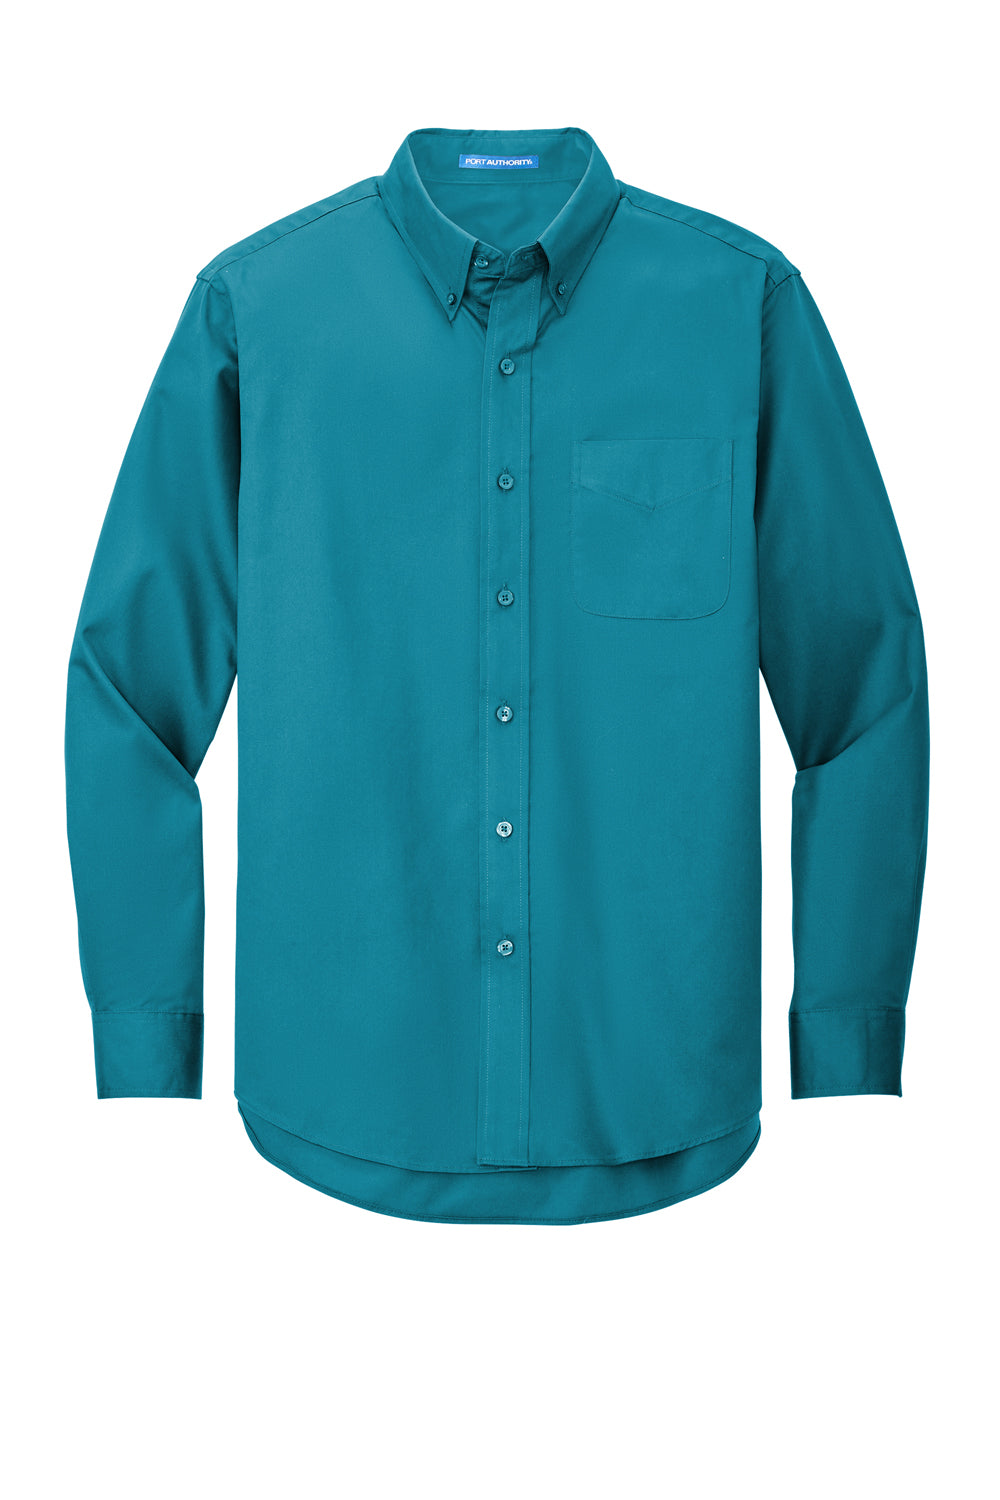 Port Authority S608/TLS608/S608ES Mens Easy Care Wrinkle Resistant Long Sleeve Button Down Shirt w/ Pocket Teal Green Flat Front